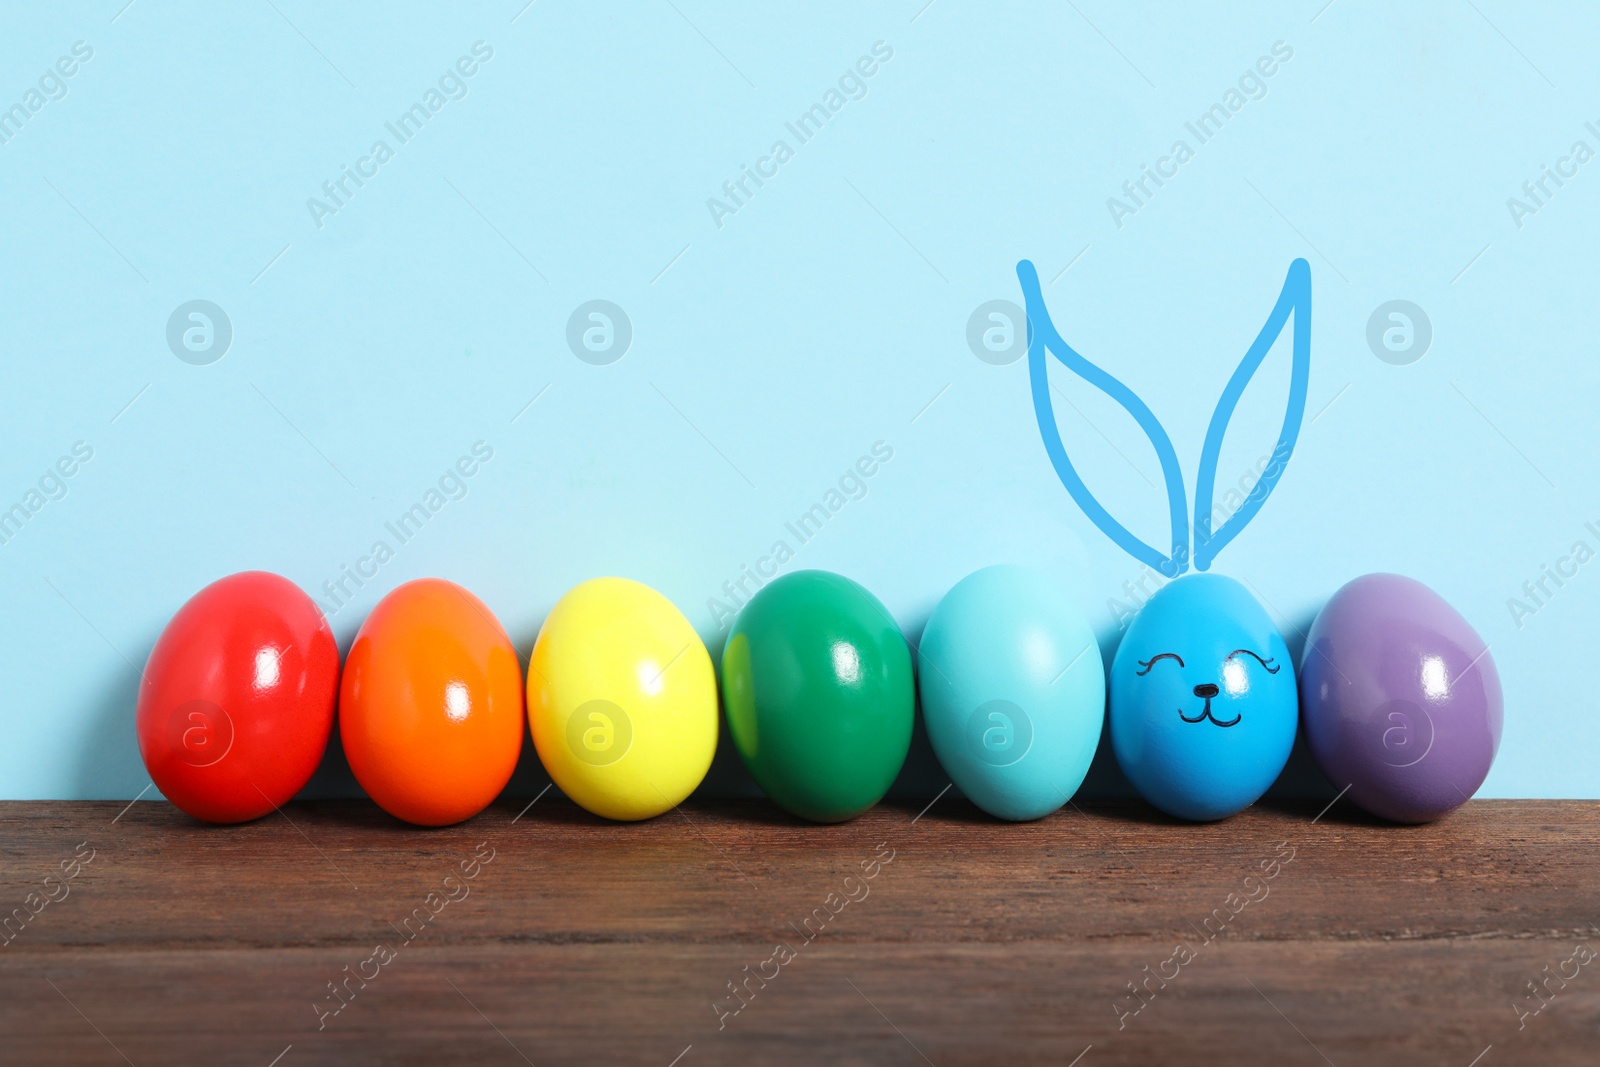 Image of One egg with drawn face and ears as Easter bunny among others on wooden table against light blue background